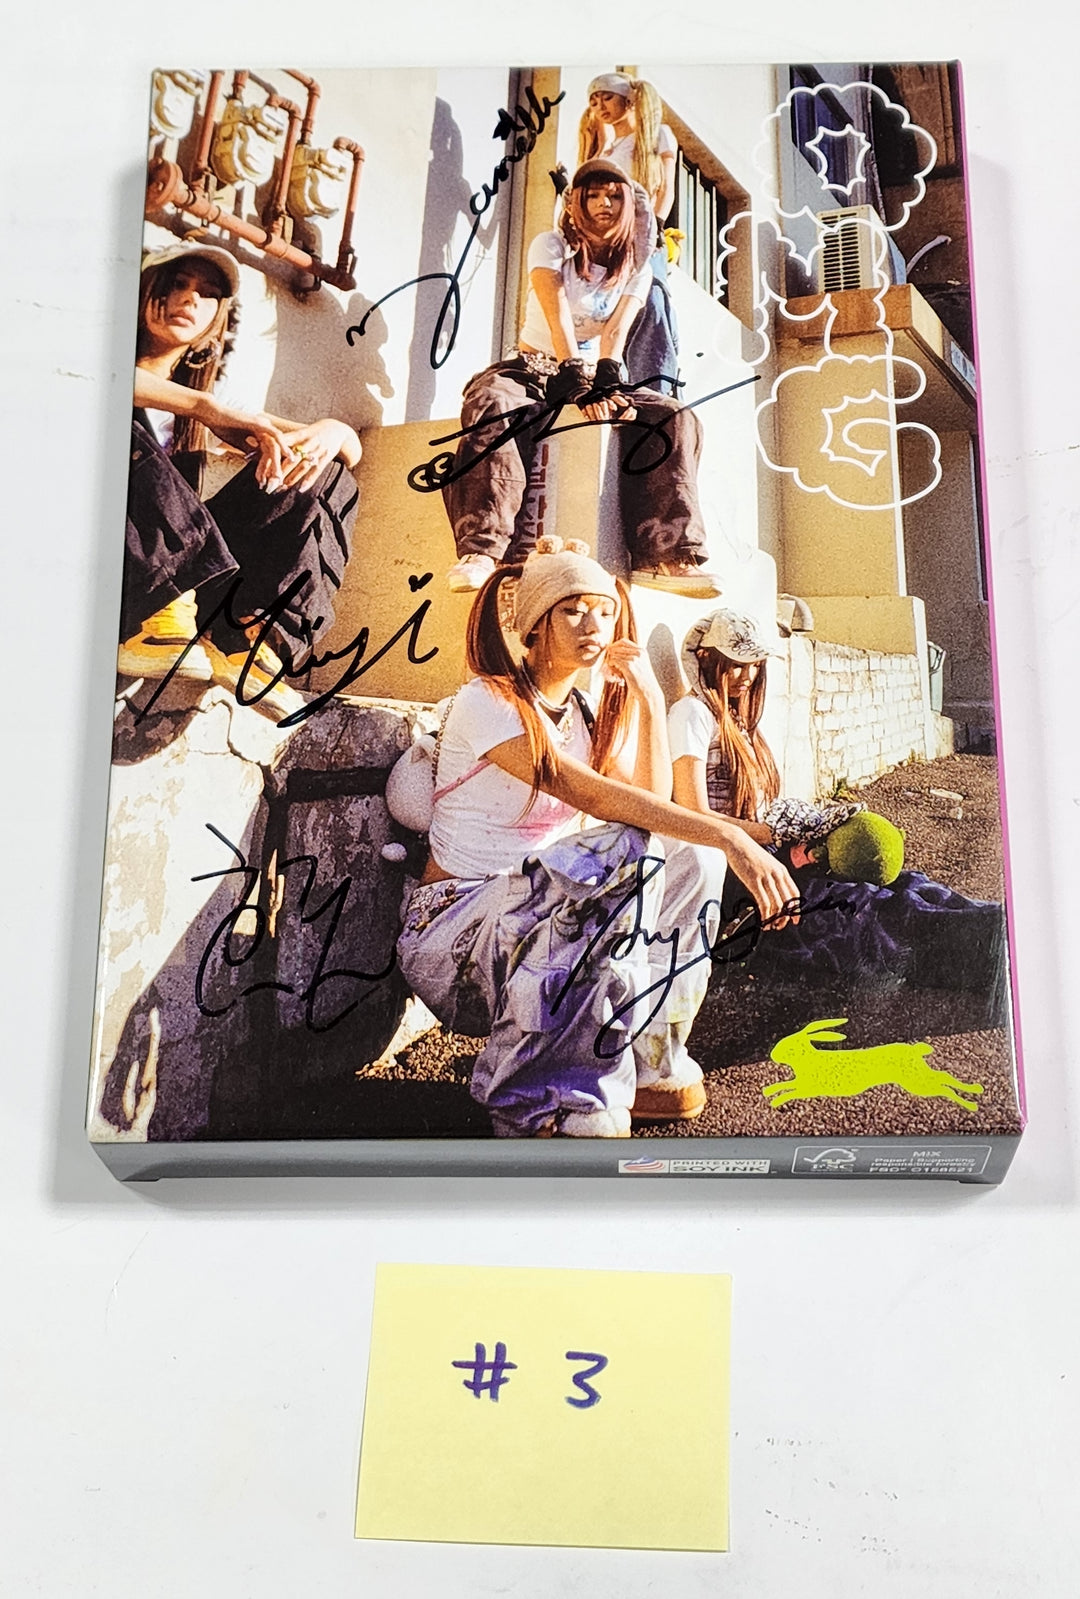 New Jeans 'OMG' - Hand Autogrpahed(Signed) 프로모션 앨범